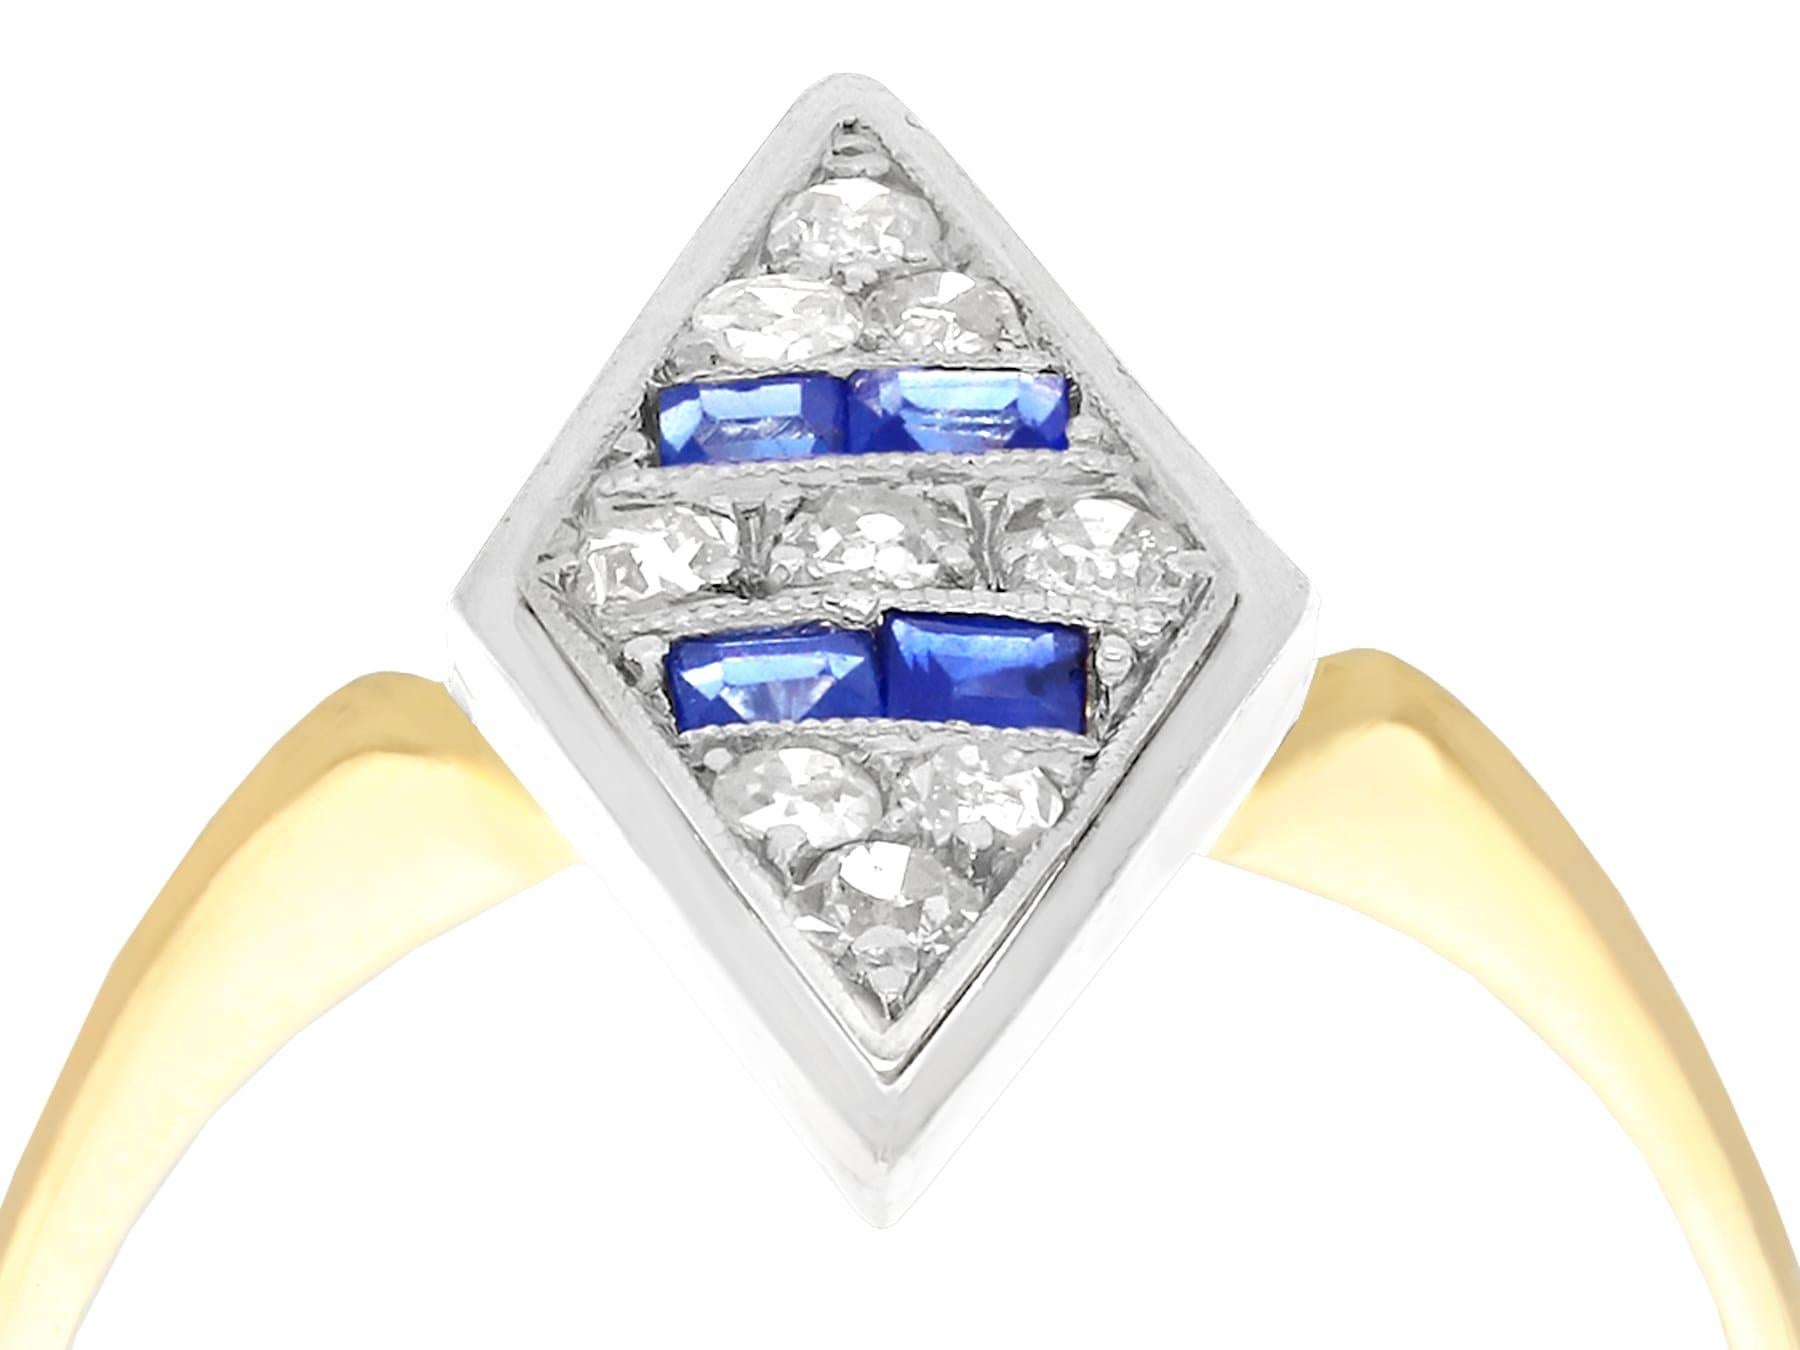 A fine and impressive antique 0.20 carat sapphire and 0.31 carat diamond, 14 karat yellow gold, palladium setting dress ring; part of our diverse antique jewelry and estate jewelry collections.

This fine and impressive antique sapphire ring has